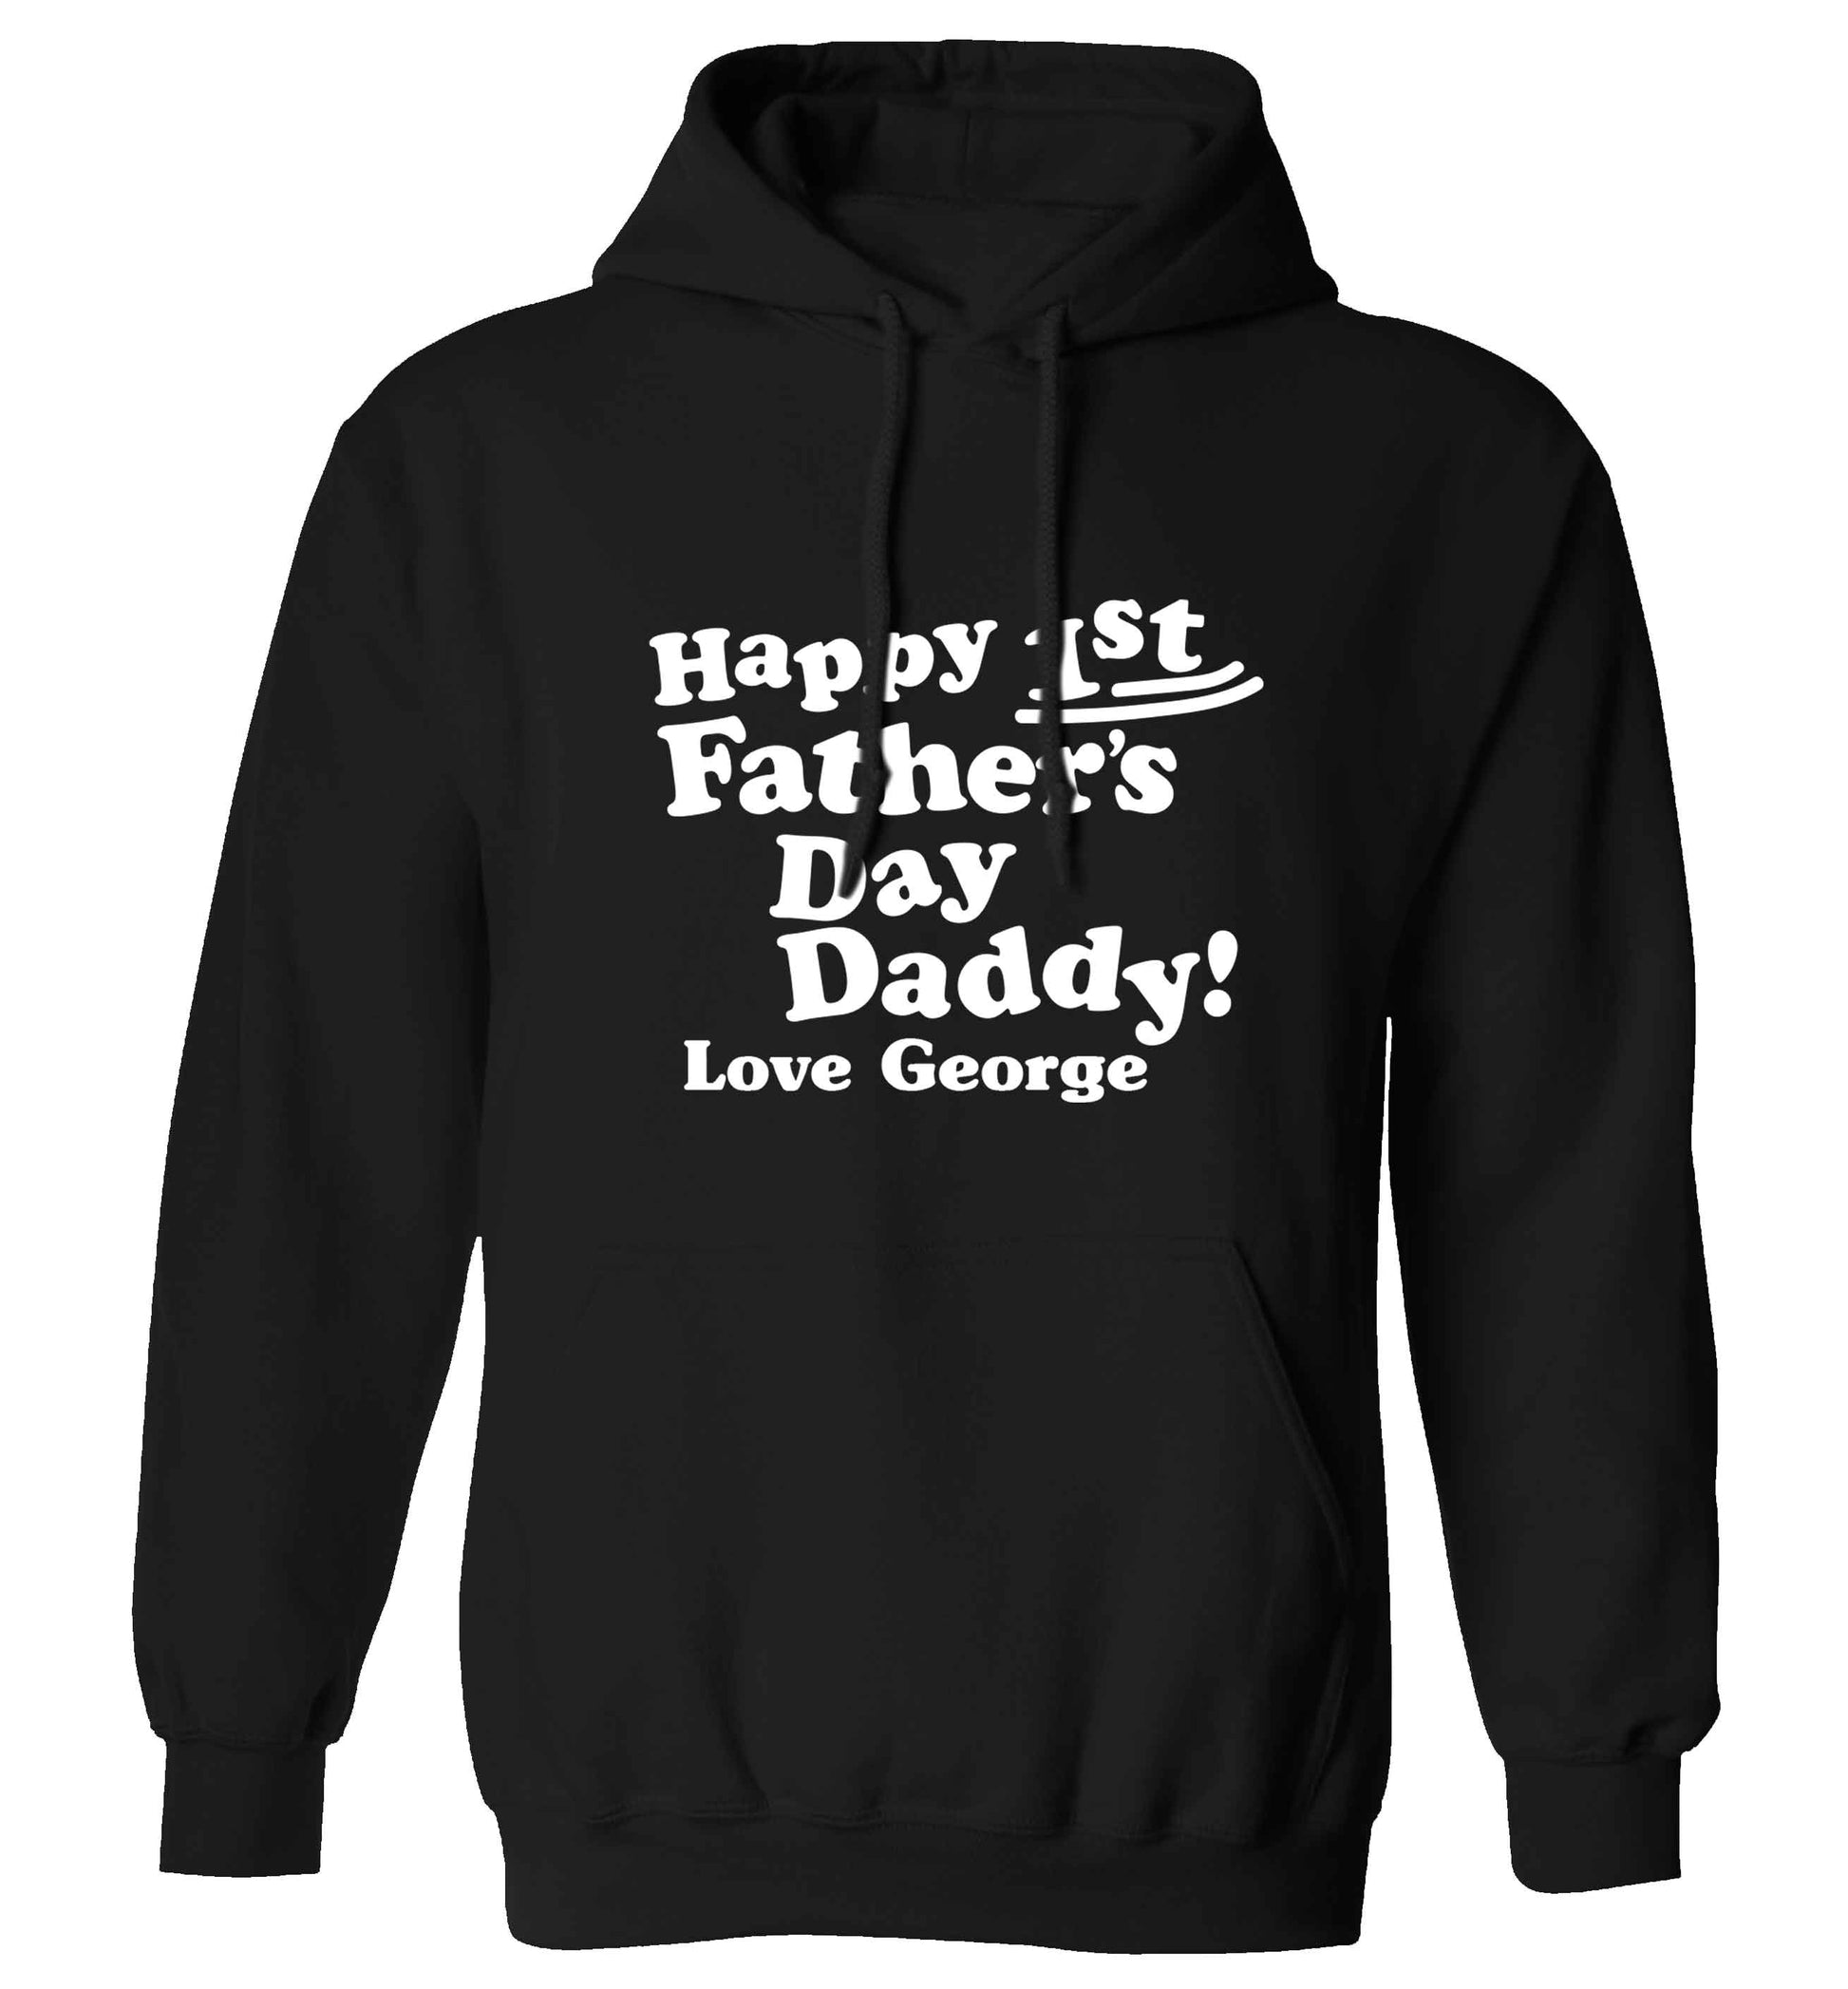 Happy first Fathers Day daddy love personalised adults unisex black hoodie 2XL